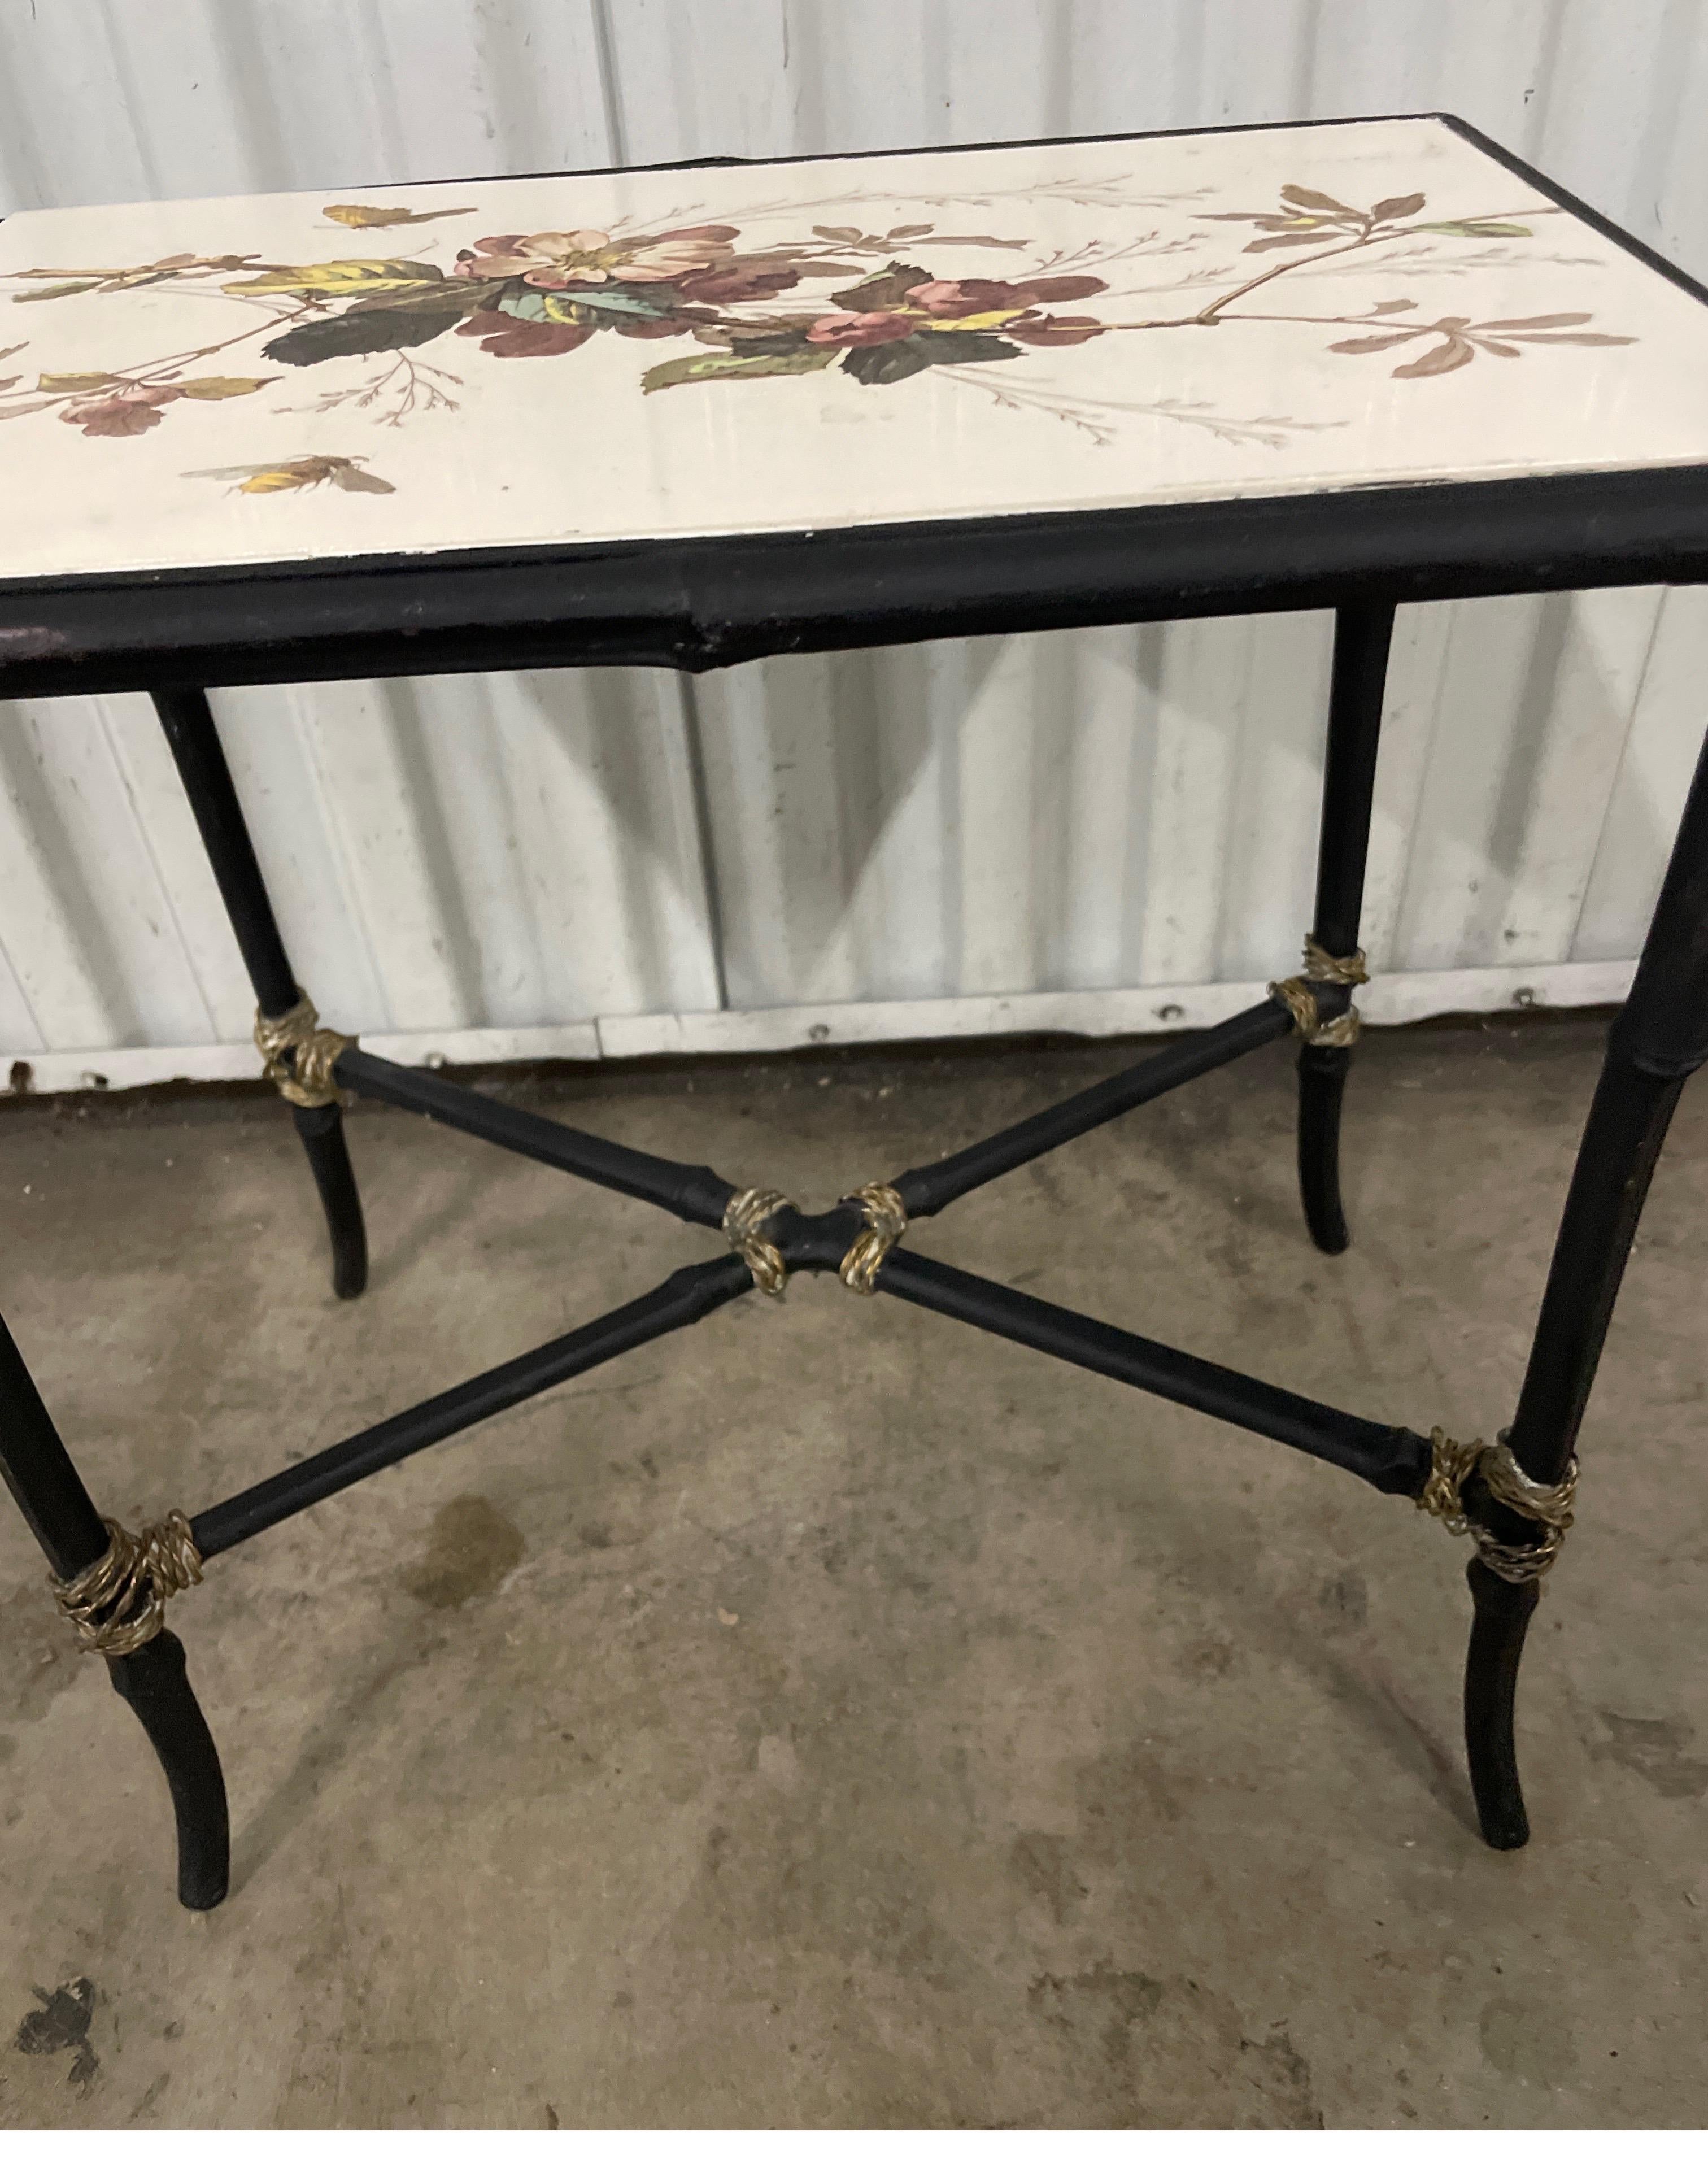 Faux bamboo wrought iron side table with brass tie accents. Top is a painted porcelain tile with flowers and butterflies. A sweet little drinks table.